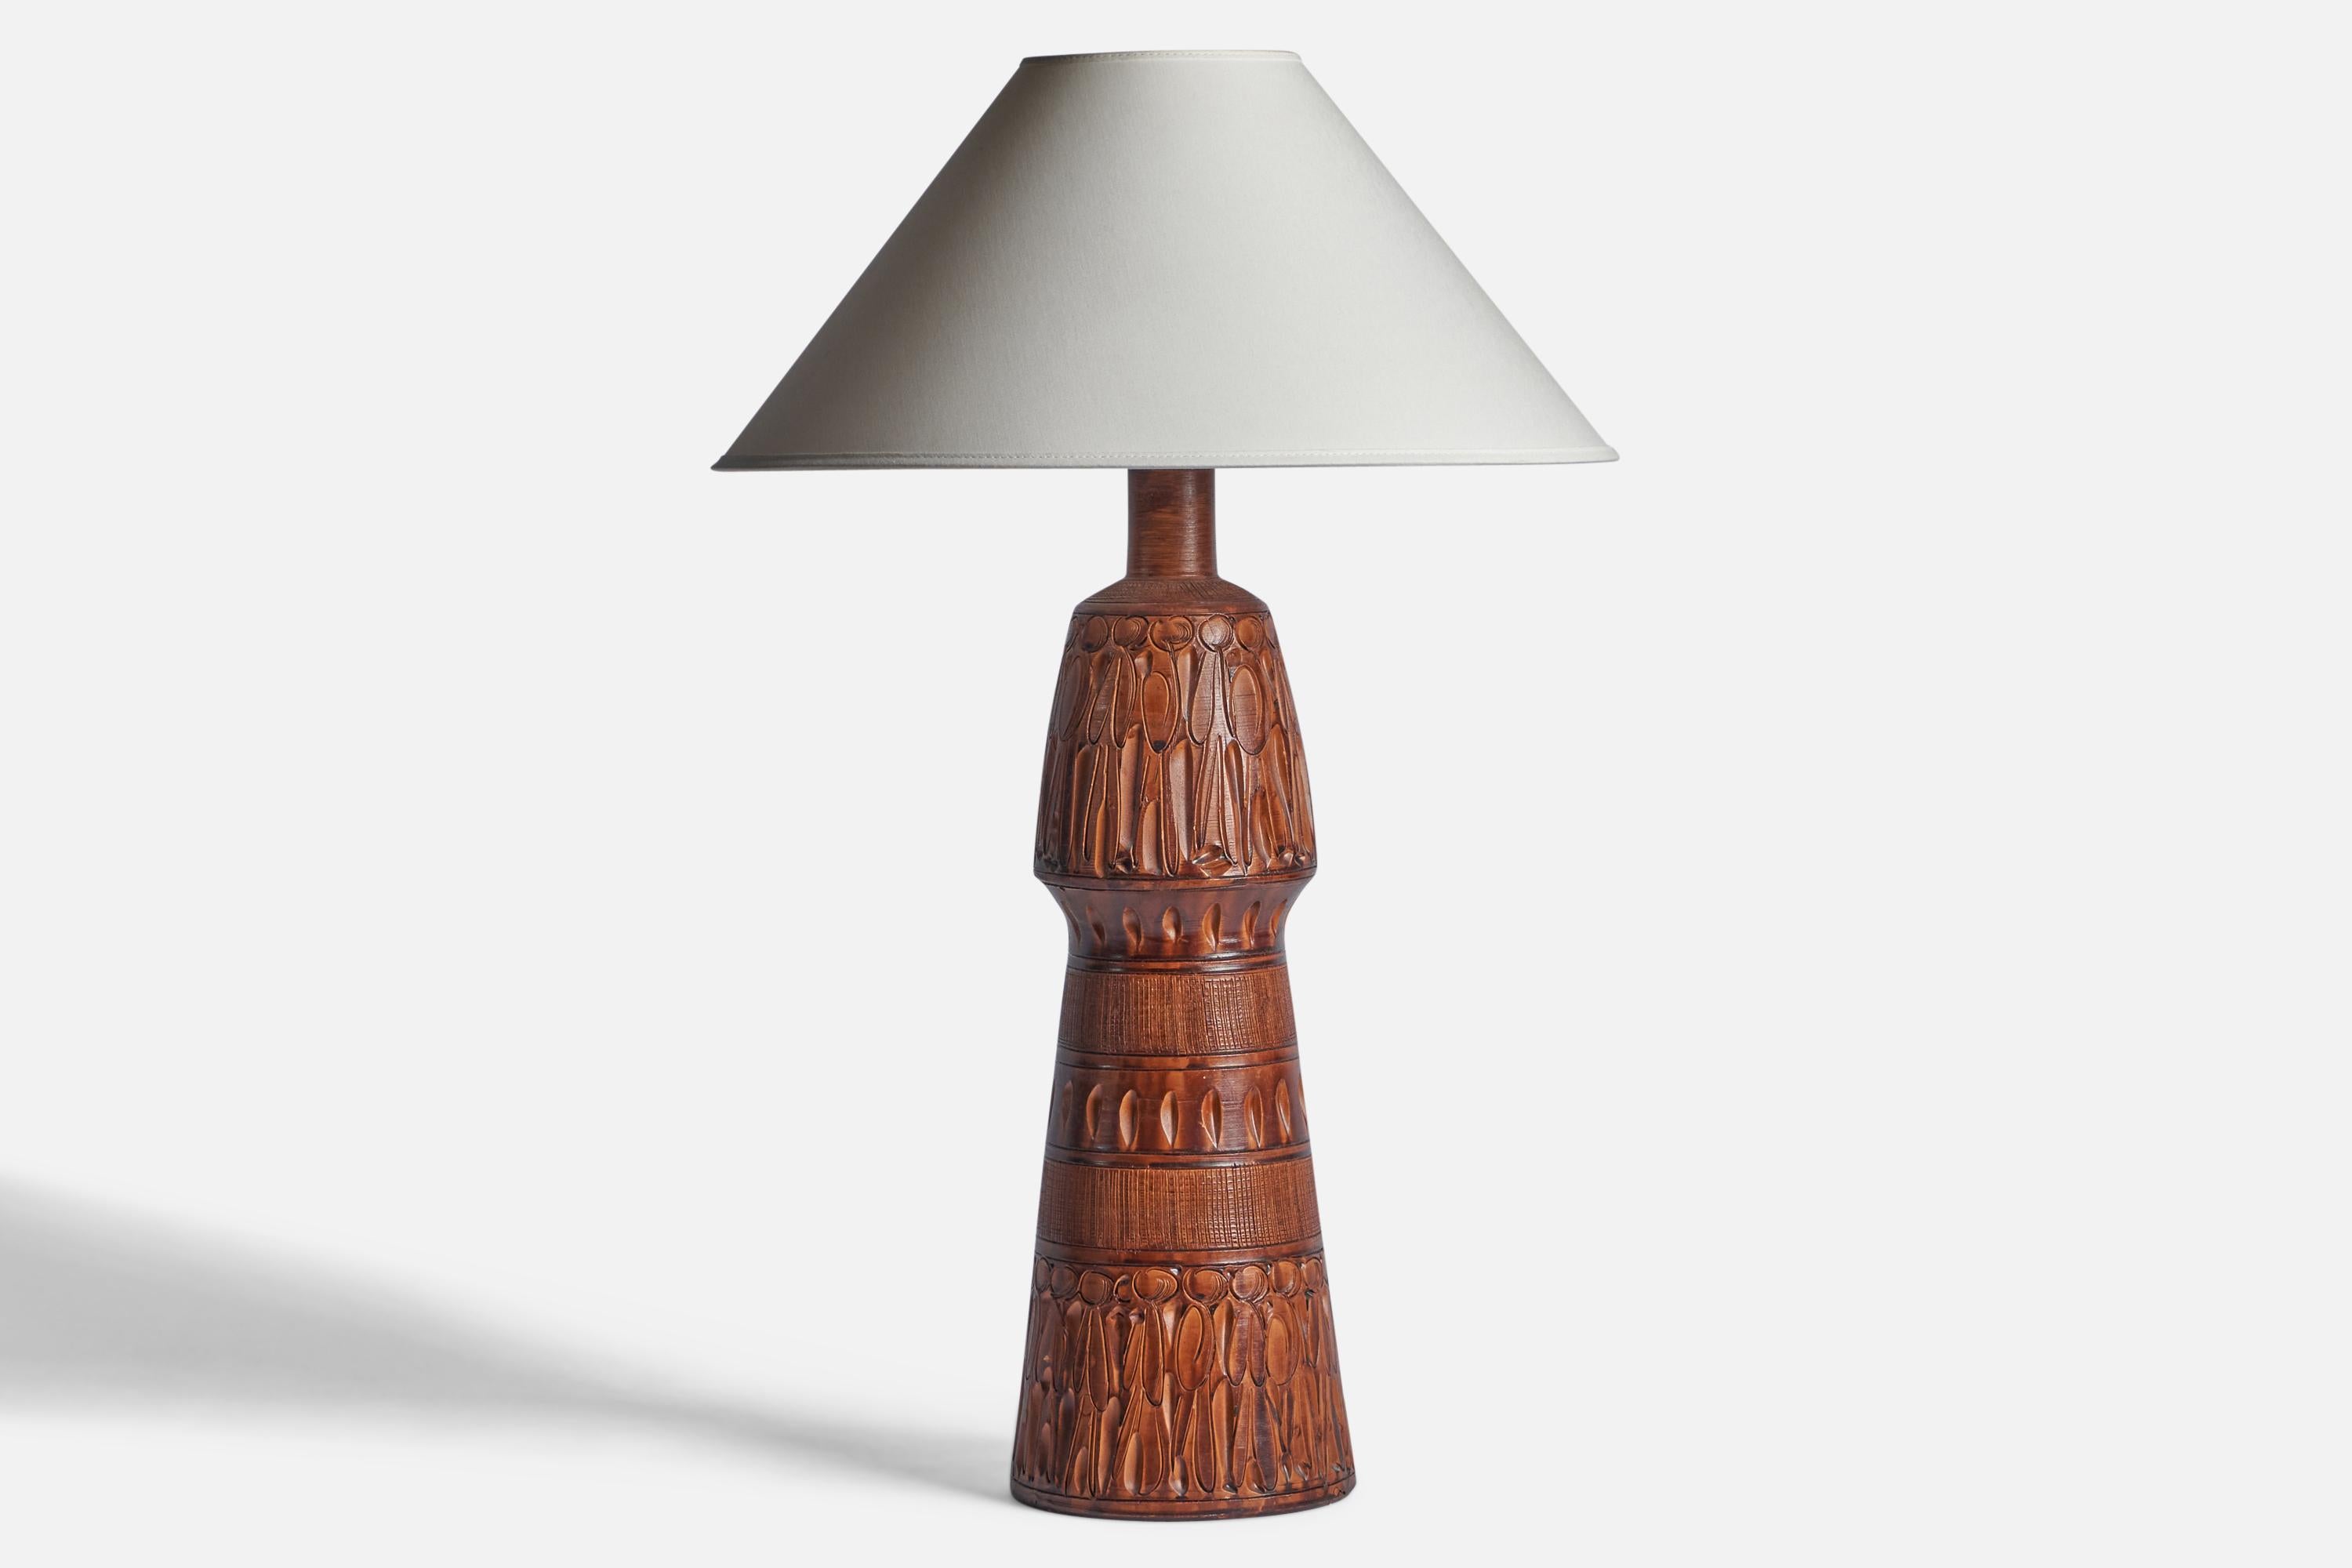 A sizeable brown-glazed and incised ceramic table lamp designed and produced in Italy, c. 1960s.

Dimensions of Lamp (inches): 21” H x 6.2” Diameter
Dimensions of Shade (inches): 4.5” Top Diameter x 16” Bottom Diameter x 7.25” H
Dimensions of Lamp